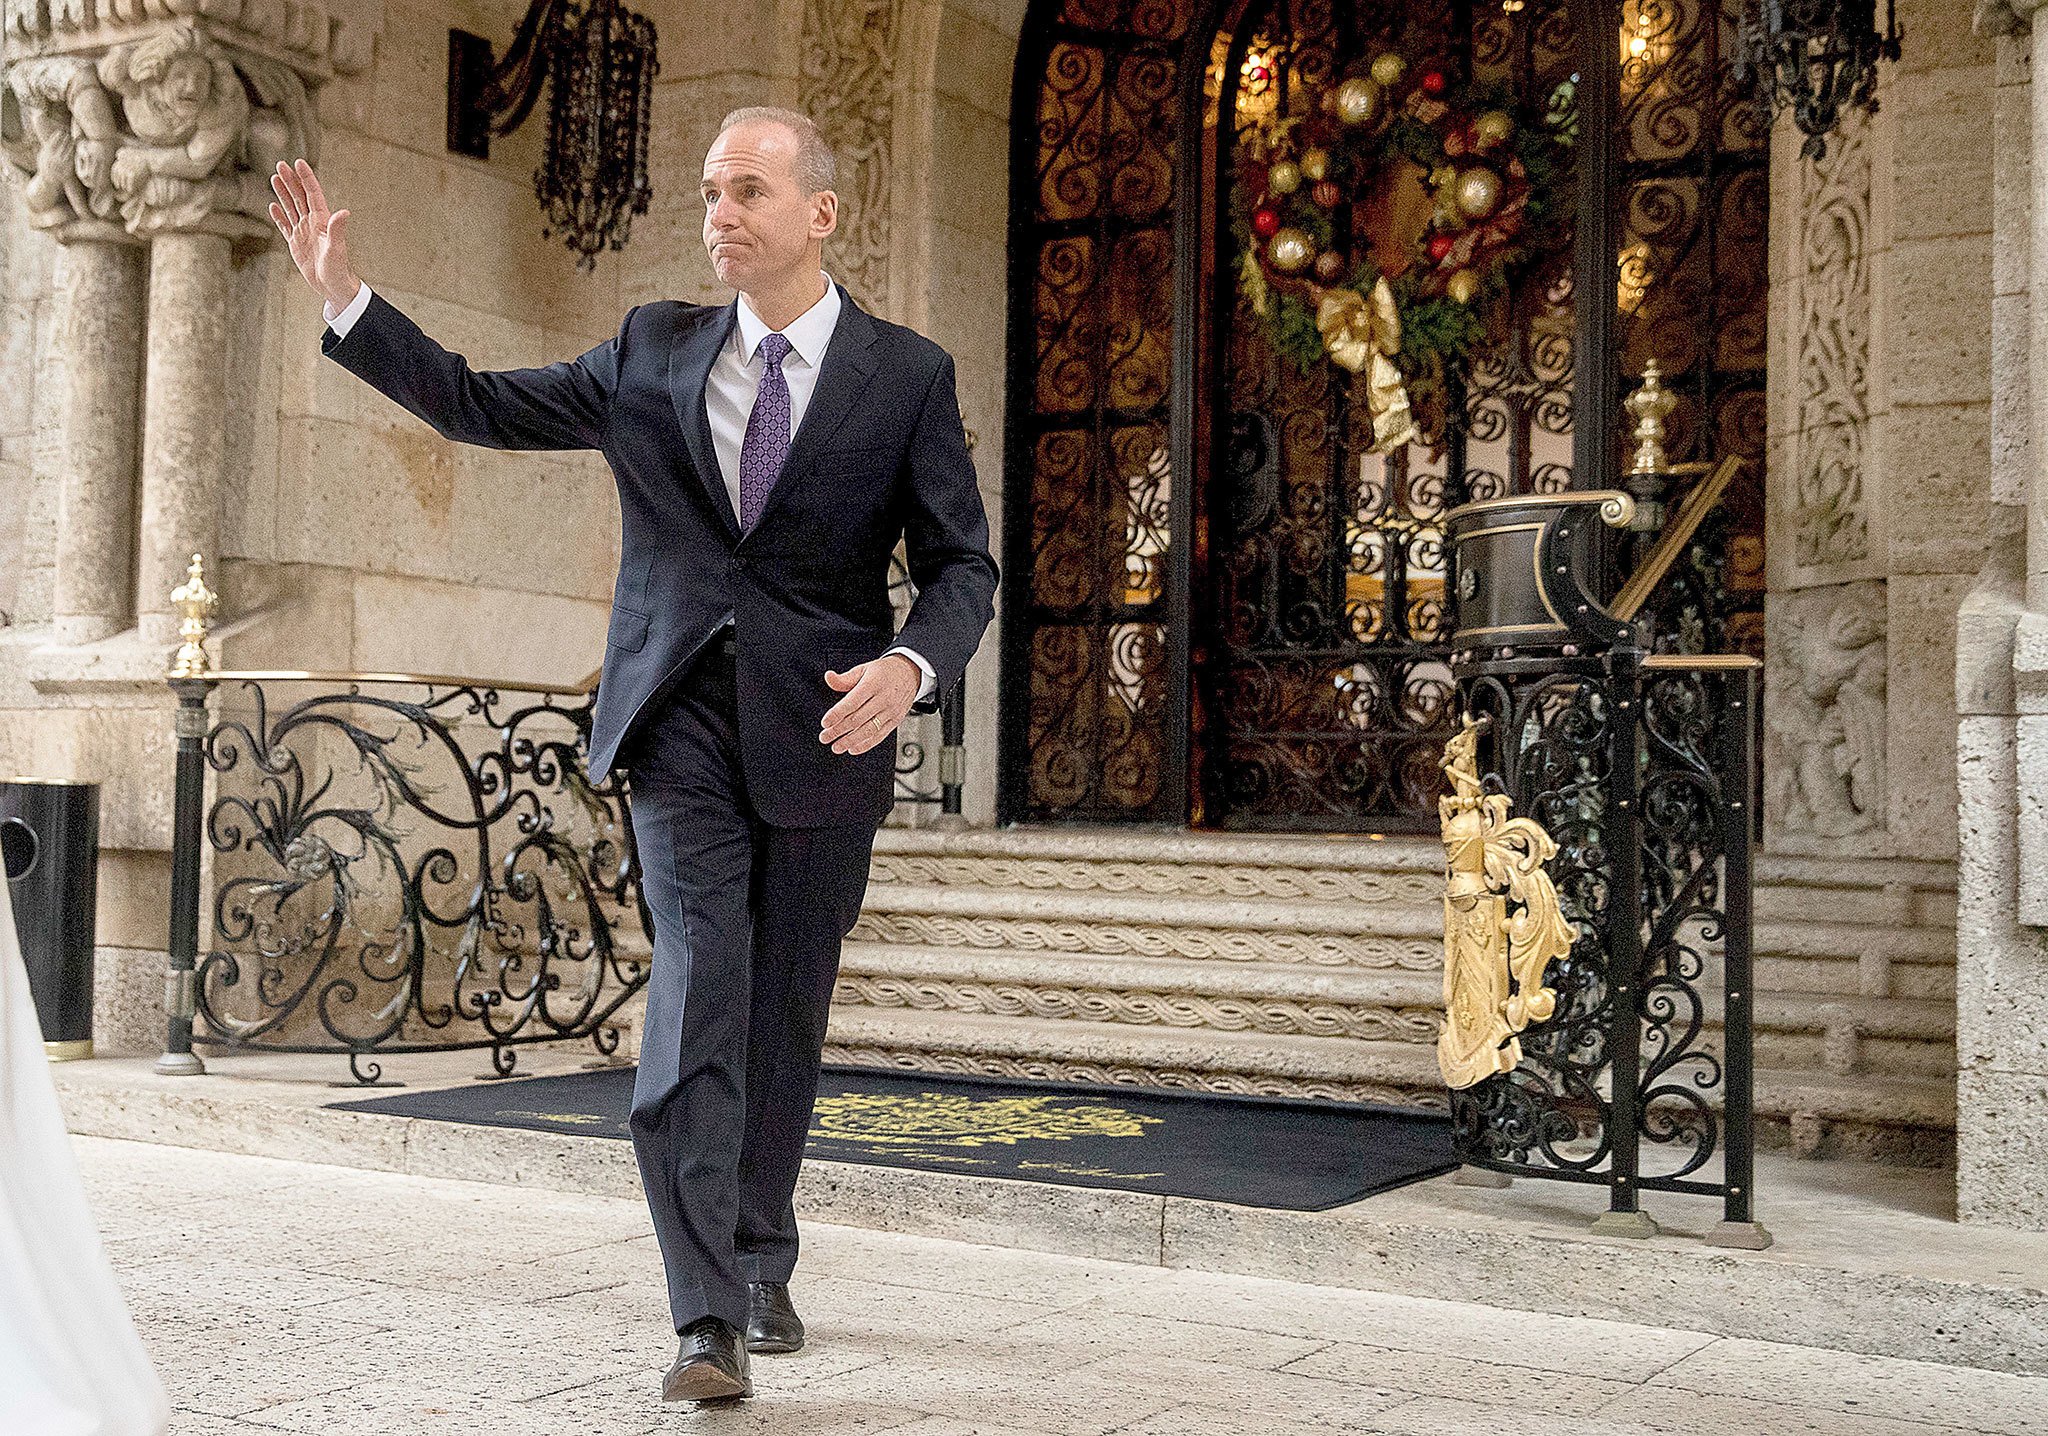 Boeing CEO Dennis Muilenburg departs Mar-a-Lago, in Palm Beach, Florida, after meeting with then-President-elect Donald Trump on Dec. 21. (AP Photo/Andrew Harnik)